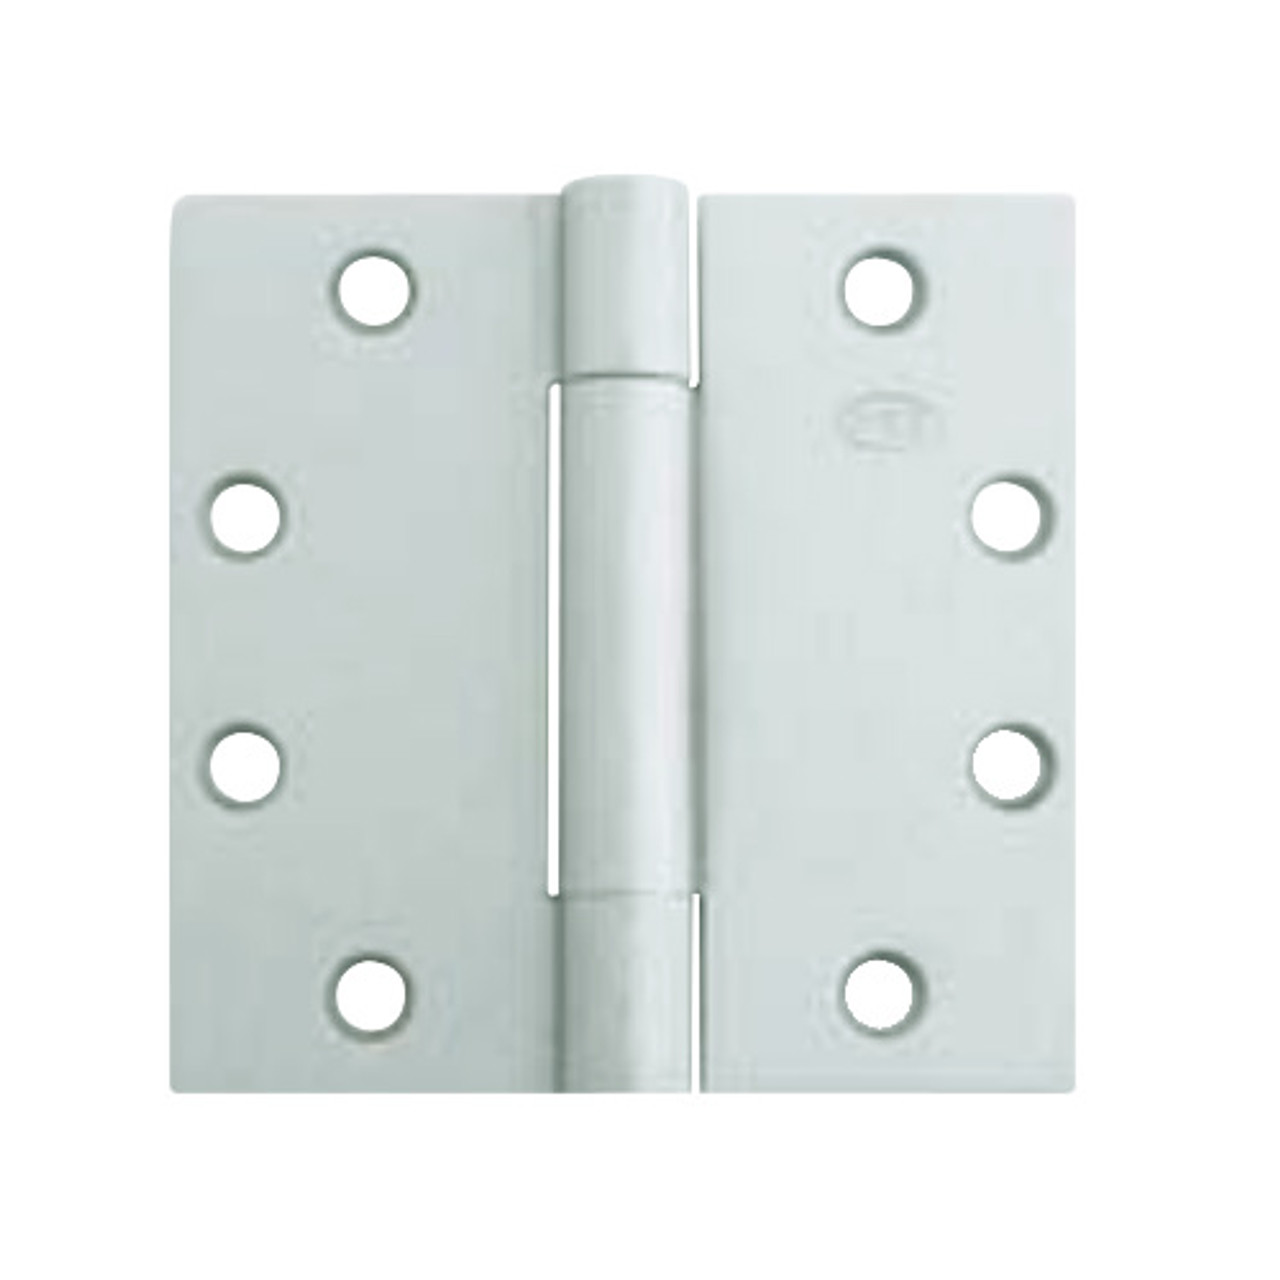 3CB1-4-5x4-5-646-TW4 IVES 3 Knuckle Concealed Bearing Full Mortise Hinge with Electric Thru-Wire in Satin Nickel Plated